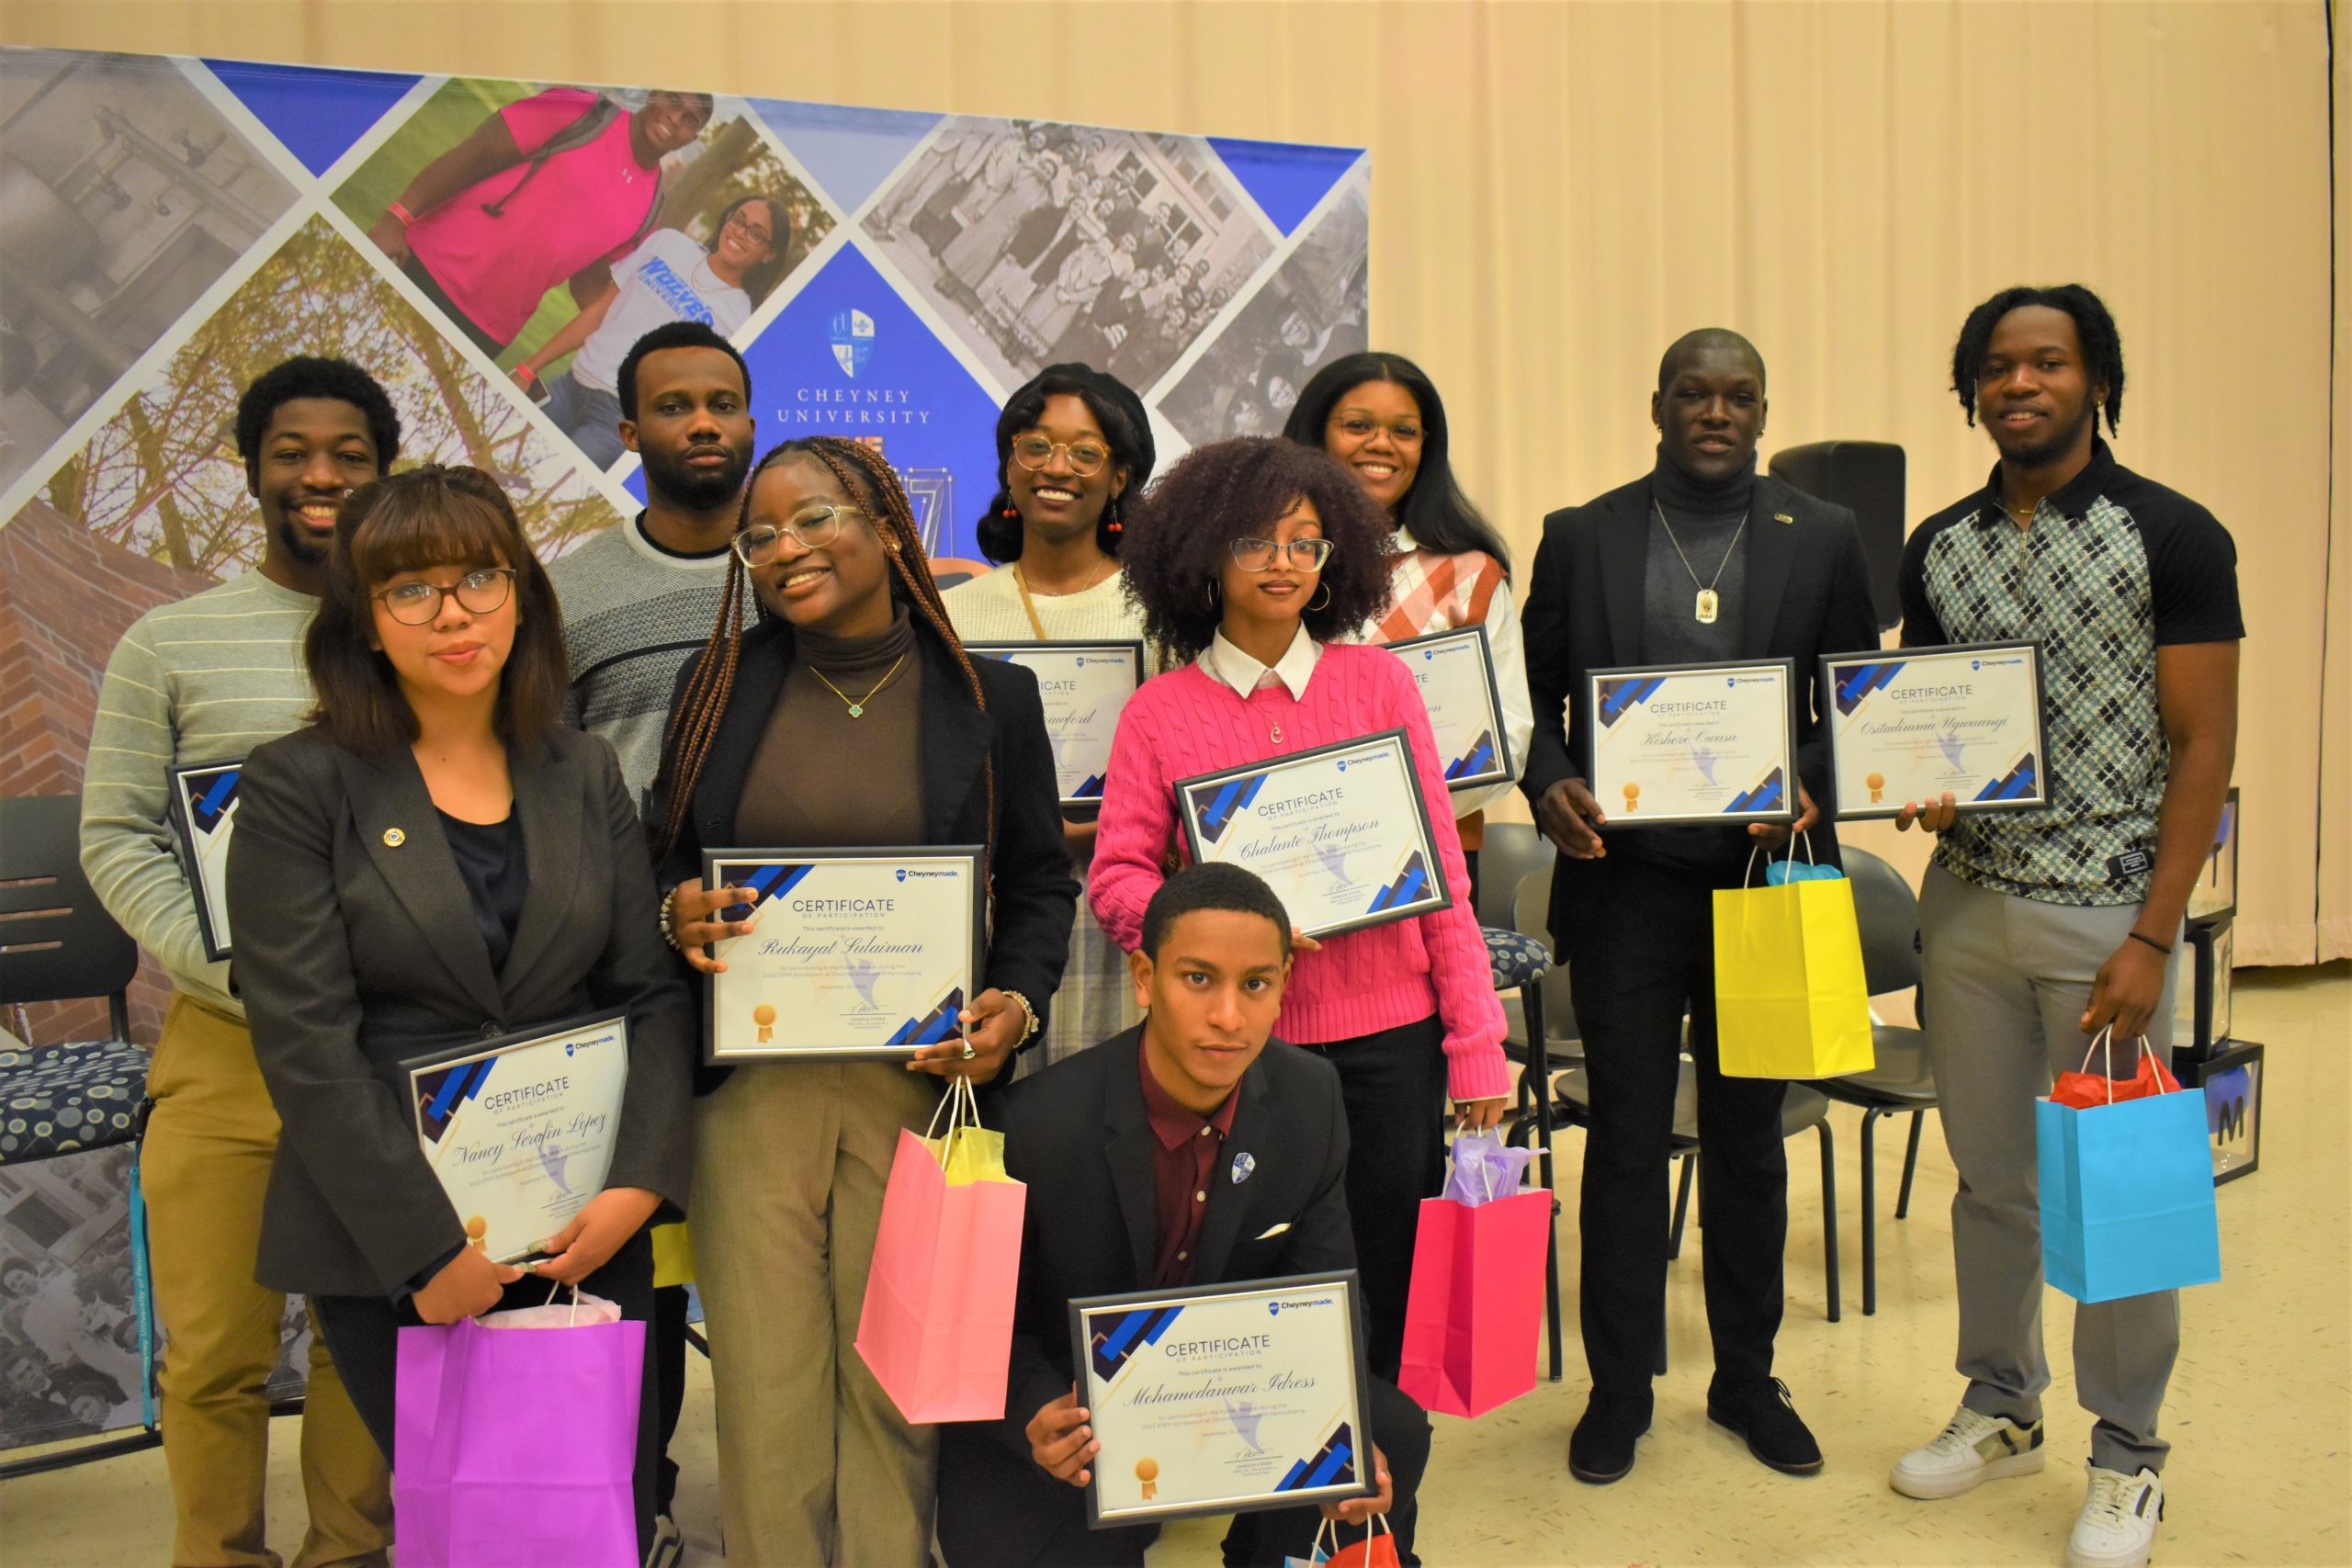 cheyney-university-symposium-highlights-students-working-to-become